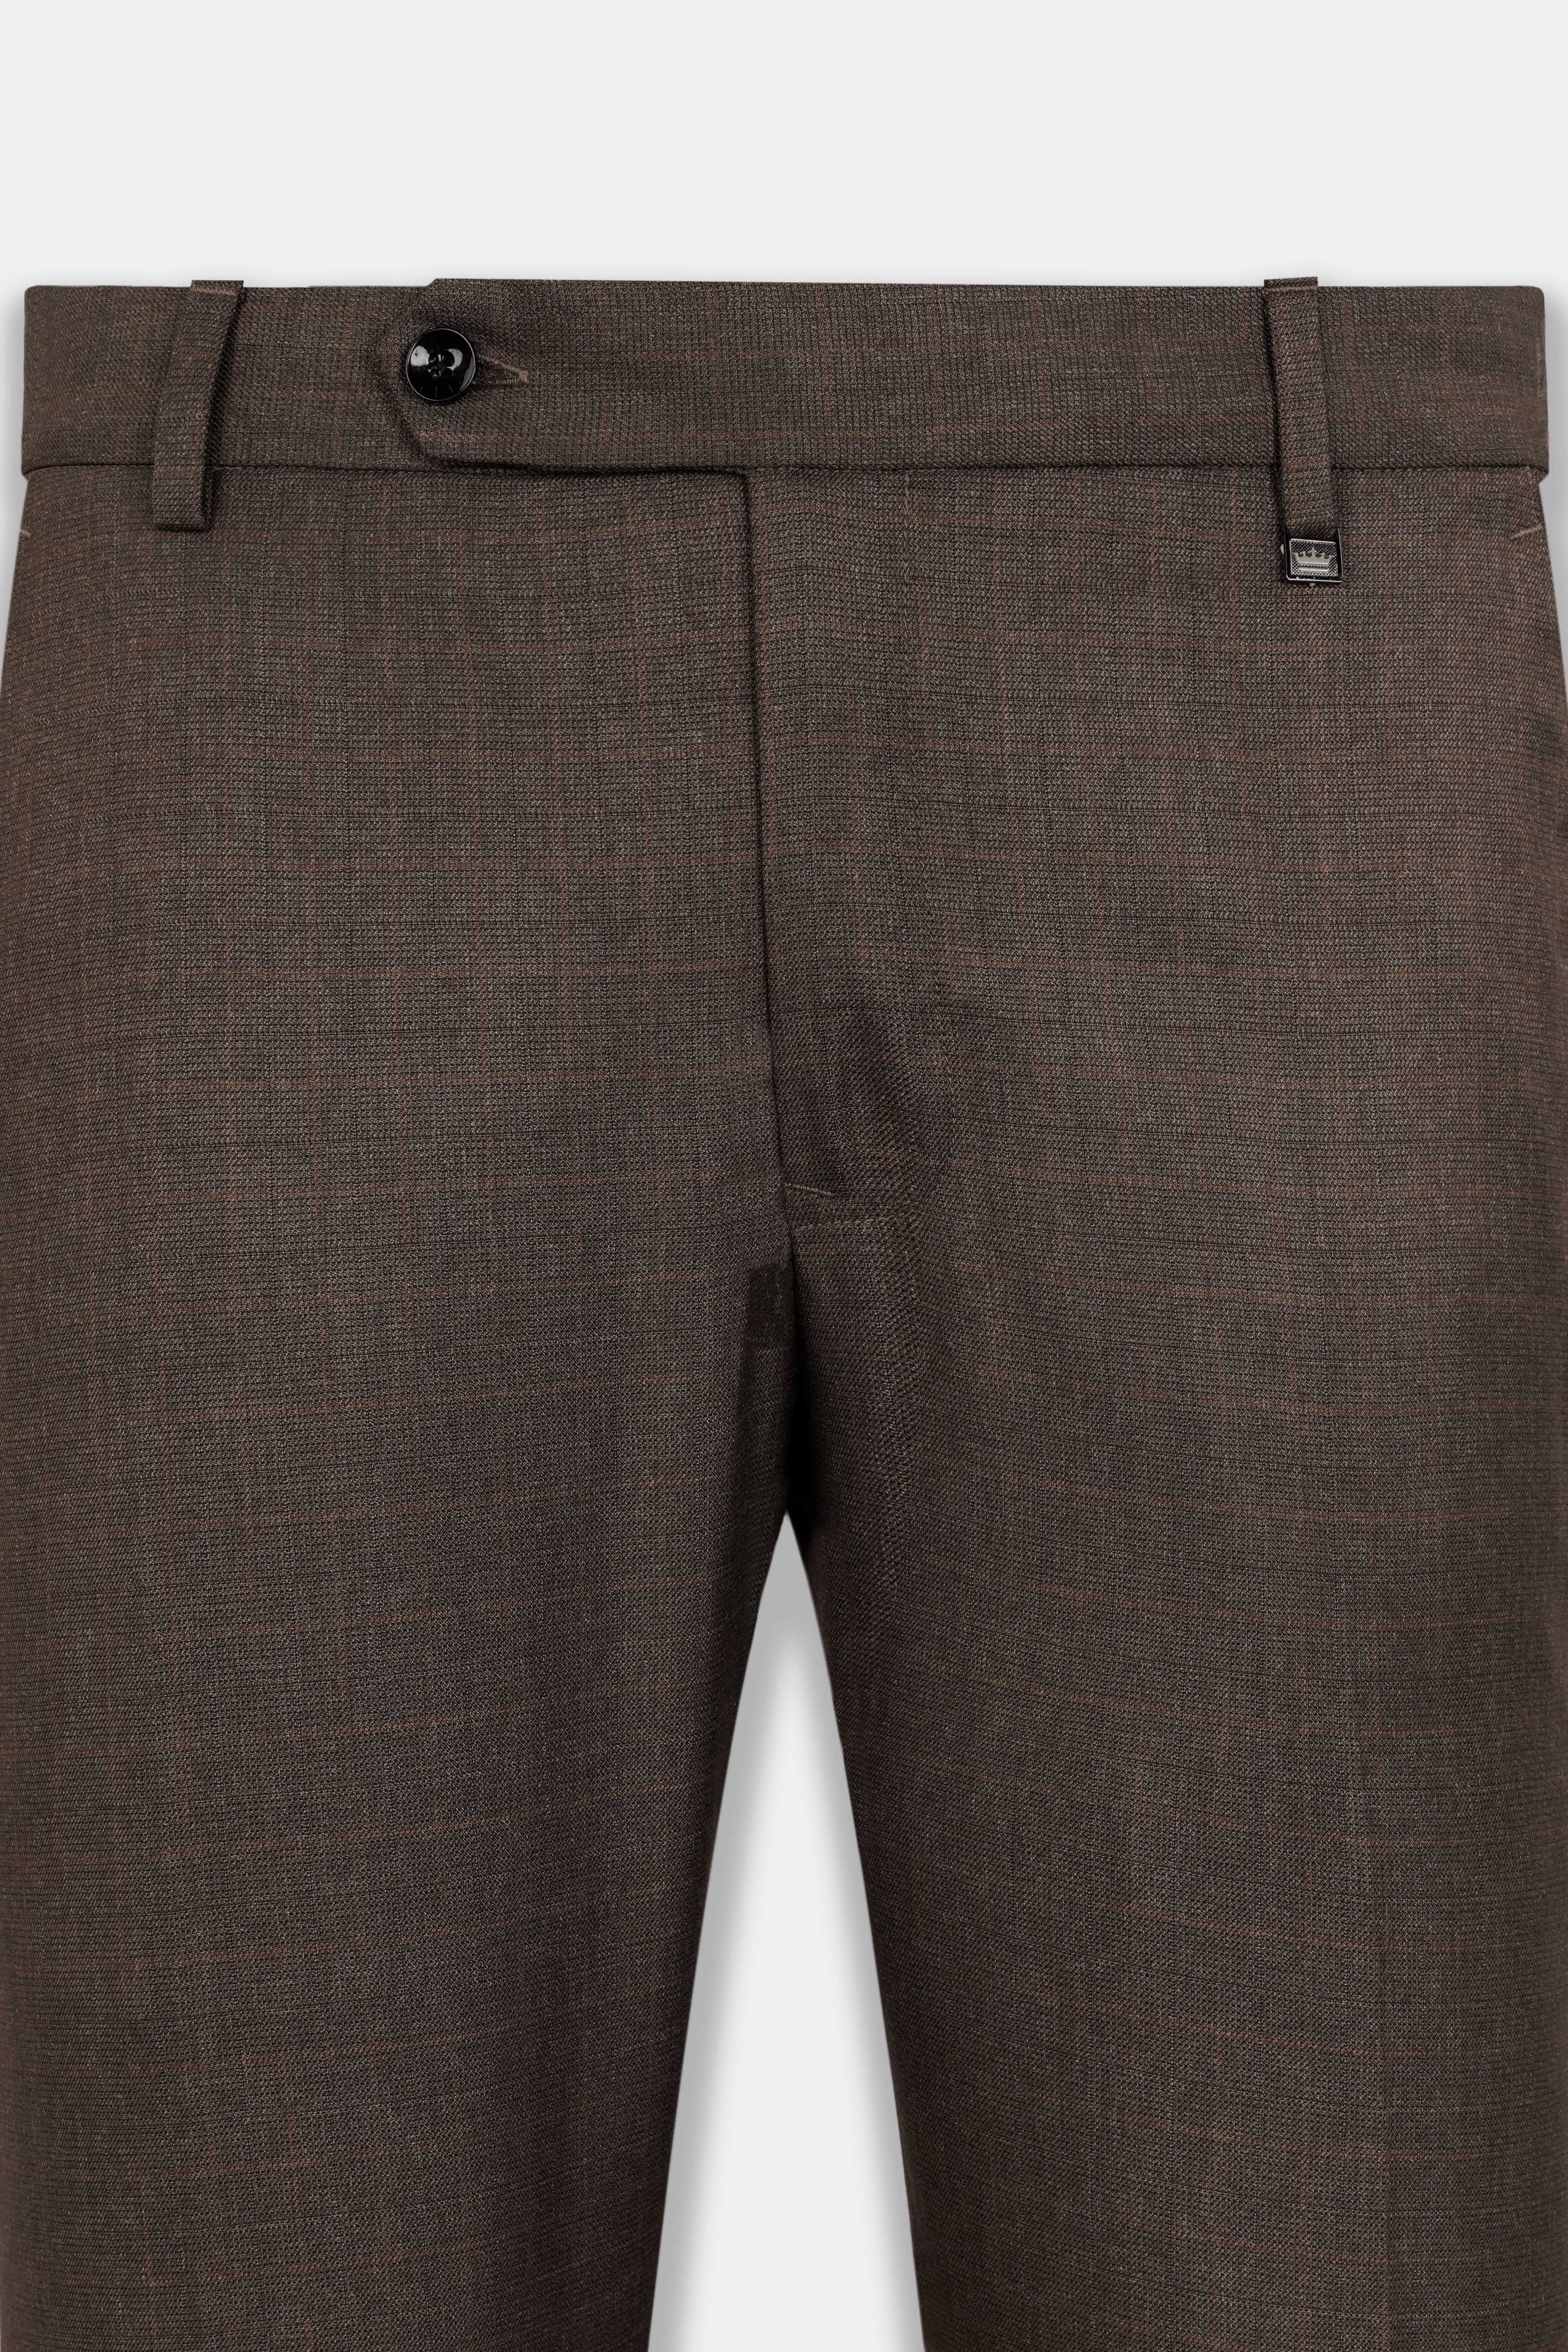 Last & Lapel - The 𝐄𝐜𝐡𝐢𝐳𝐞𝐧𝐲𝐚 light brown wool trousers in the [New  Classic] cut. ⠀ #Echizenya #classic #readytowear #pants #madeinJapan  #madetomeasure #trousers #Eminento #LastandLapel #sartorial #tailoring  #menswear #menstyle #mensfashion ...